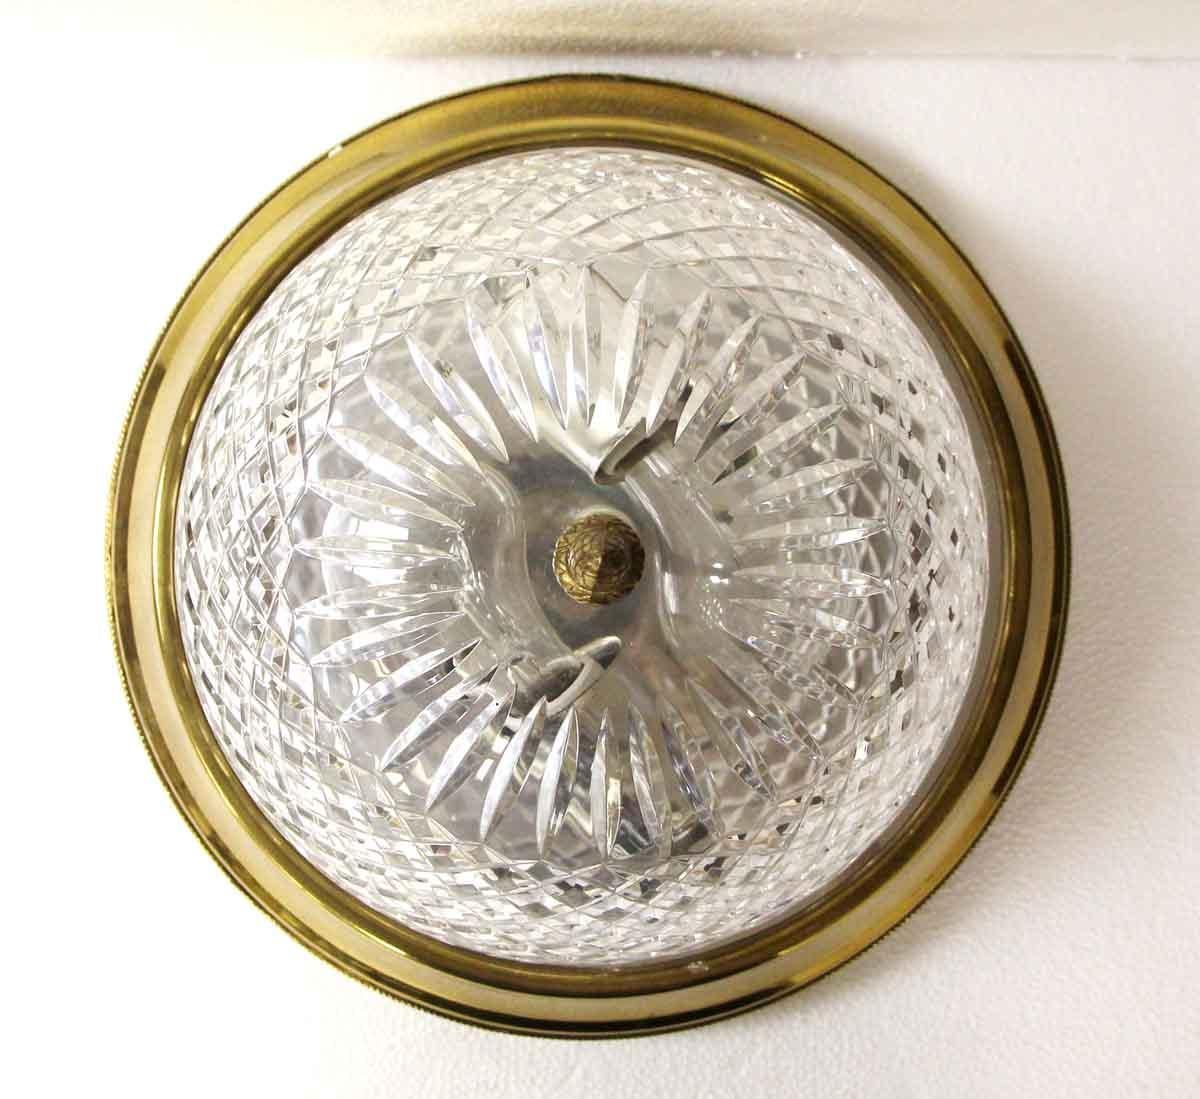 1950s NYC Waldorf Astoria Hotel crystal flush mount fixture with a polished brass rim and pineapple finial. From the suites of the Waldorf Astoria Towers. Waldorf Astoria authenticity card included with your purchase. Small quantity available at